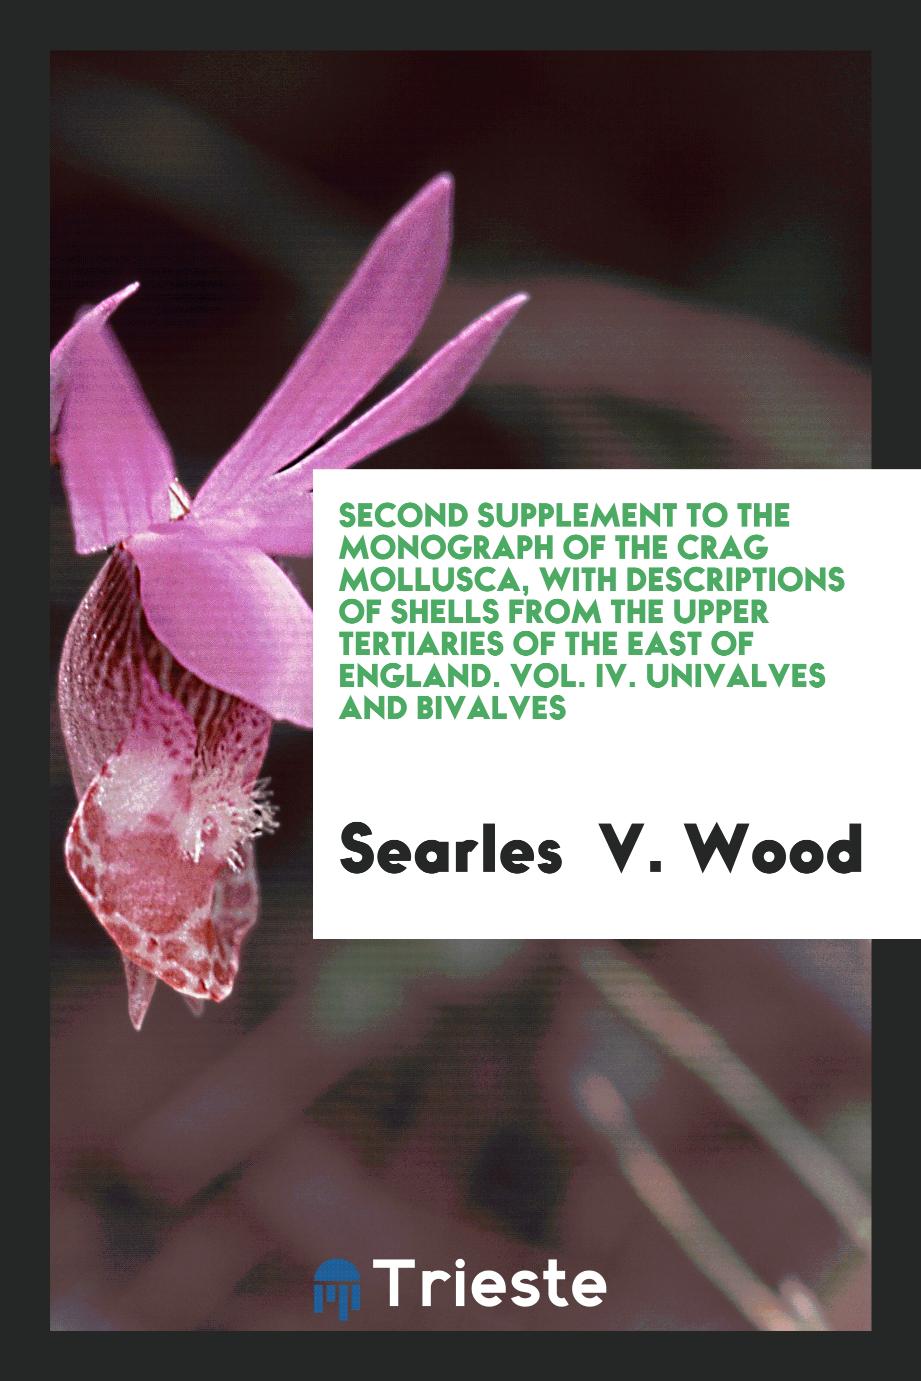 Second Supplement to the Monograph of the Crag Mollusca, with Descriptions of Shells from the Upper Tertiaries of the East of England. Vol. IV. Univalves and Bivalves